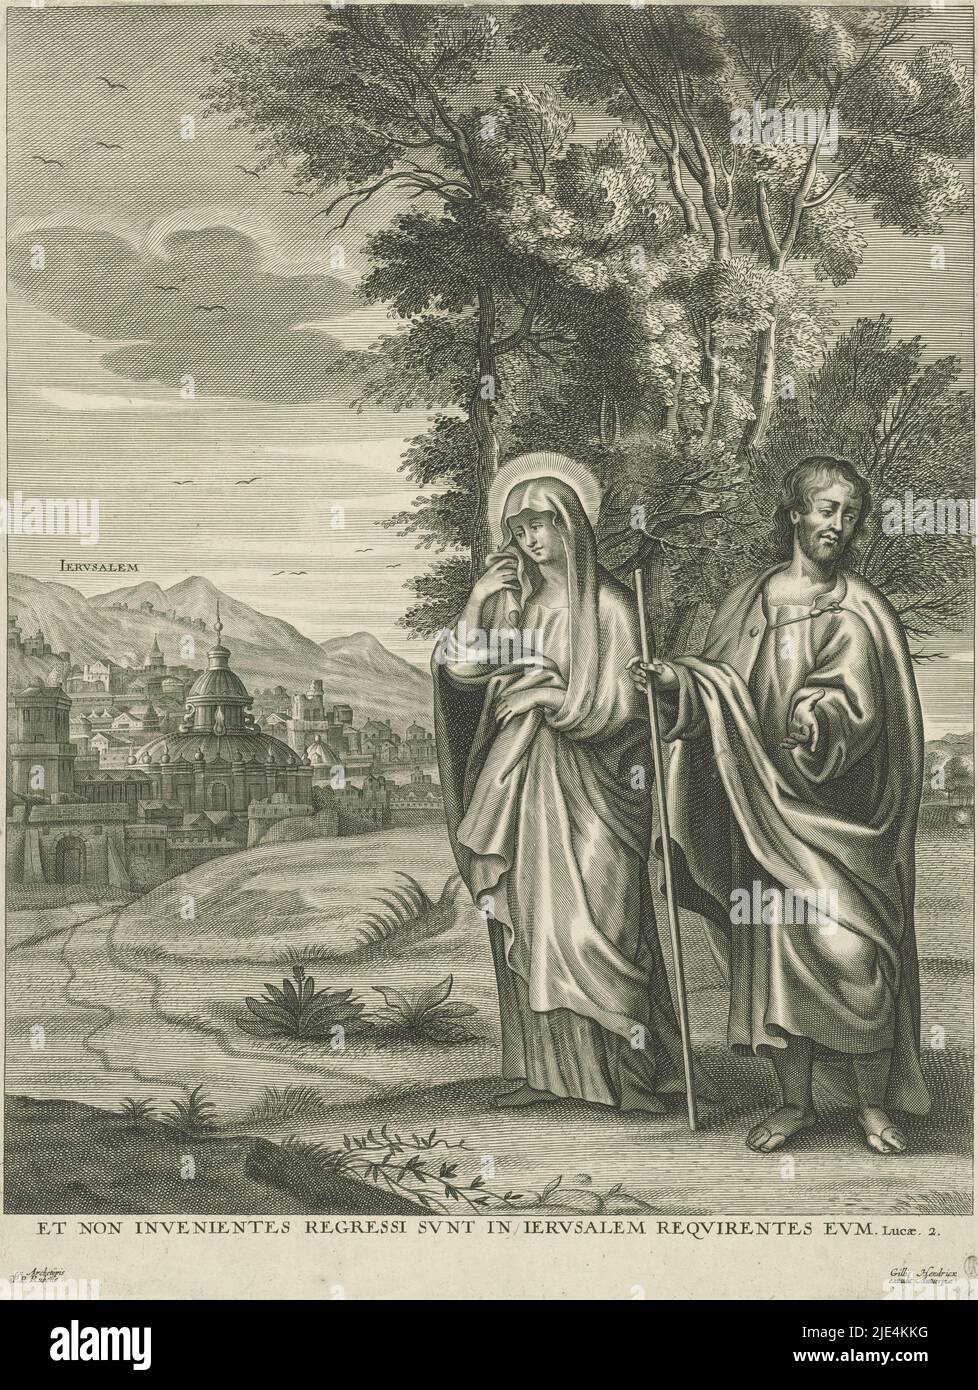 Return to Jerusalem, Adriaen Lommelin, after Peter Paul Rubens, 1630 - 1677, Joseph and Mary return to Jerusalem. The city can be seen in the distance on the left. In the margin a Bible verse in Latin., print maker: Adriaen Lommelin, Peter Paul Rubens, (free after), publisher: Gilles Hendricx, (mentioned on object), Antwerp, 1630 - 1677, paper, engraving, h 449 mm × w 340 mm Stock Photo